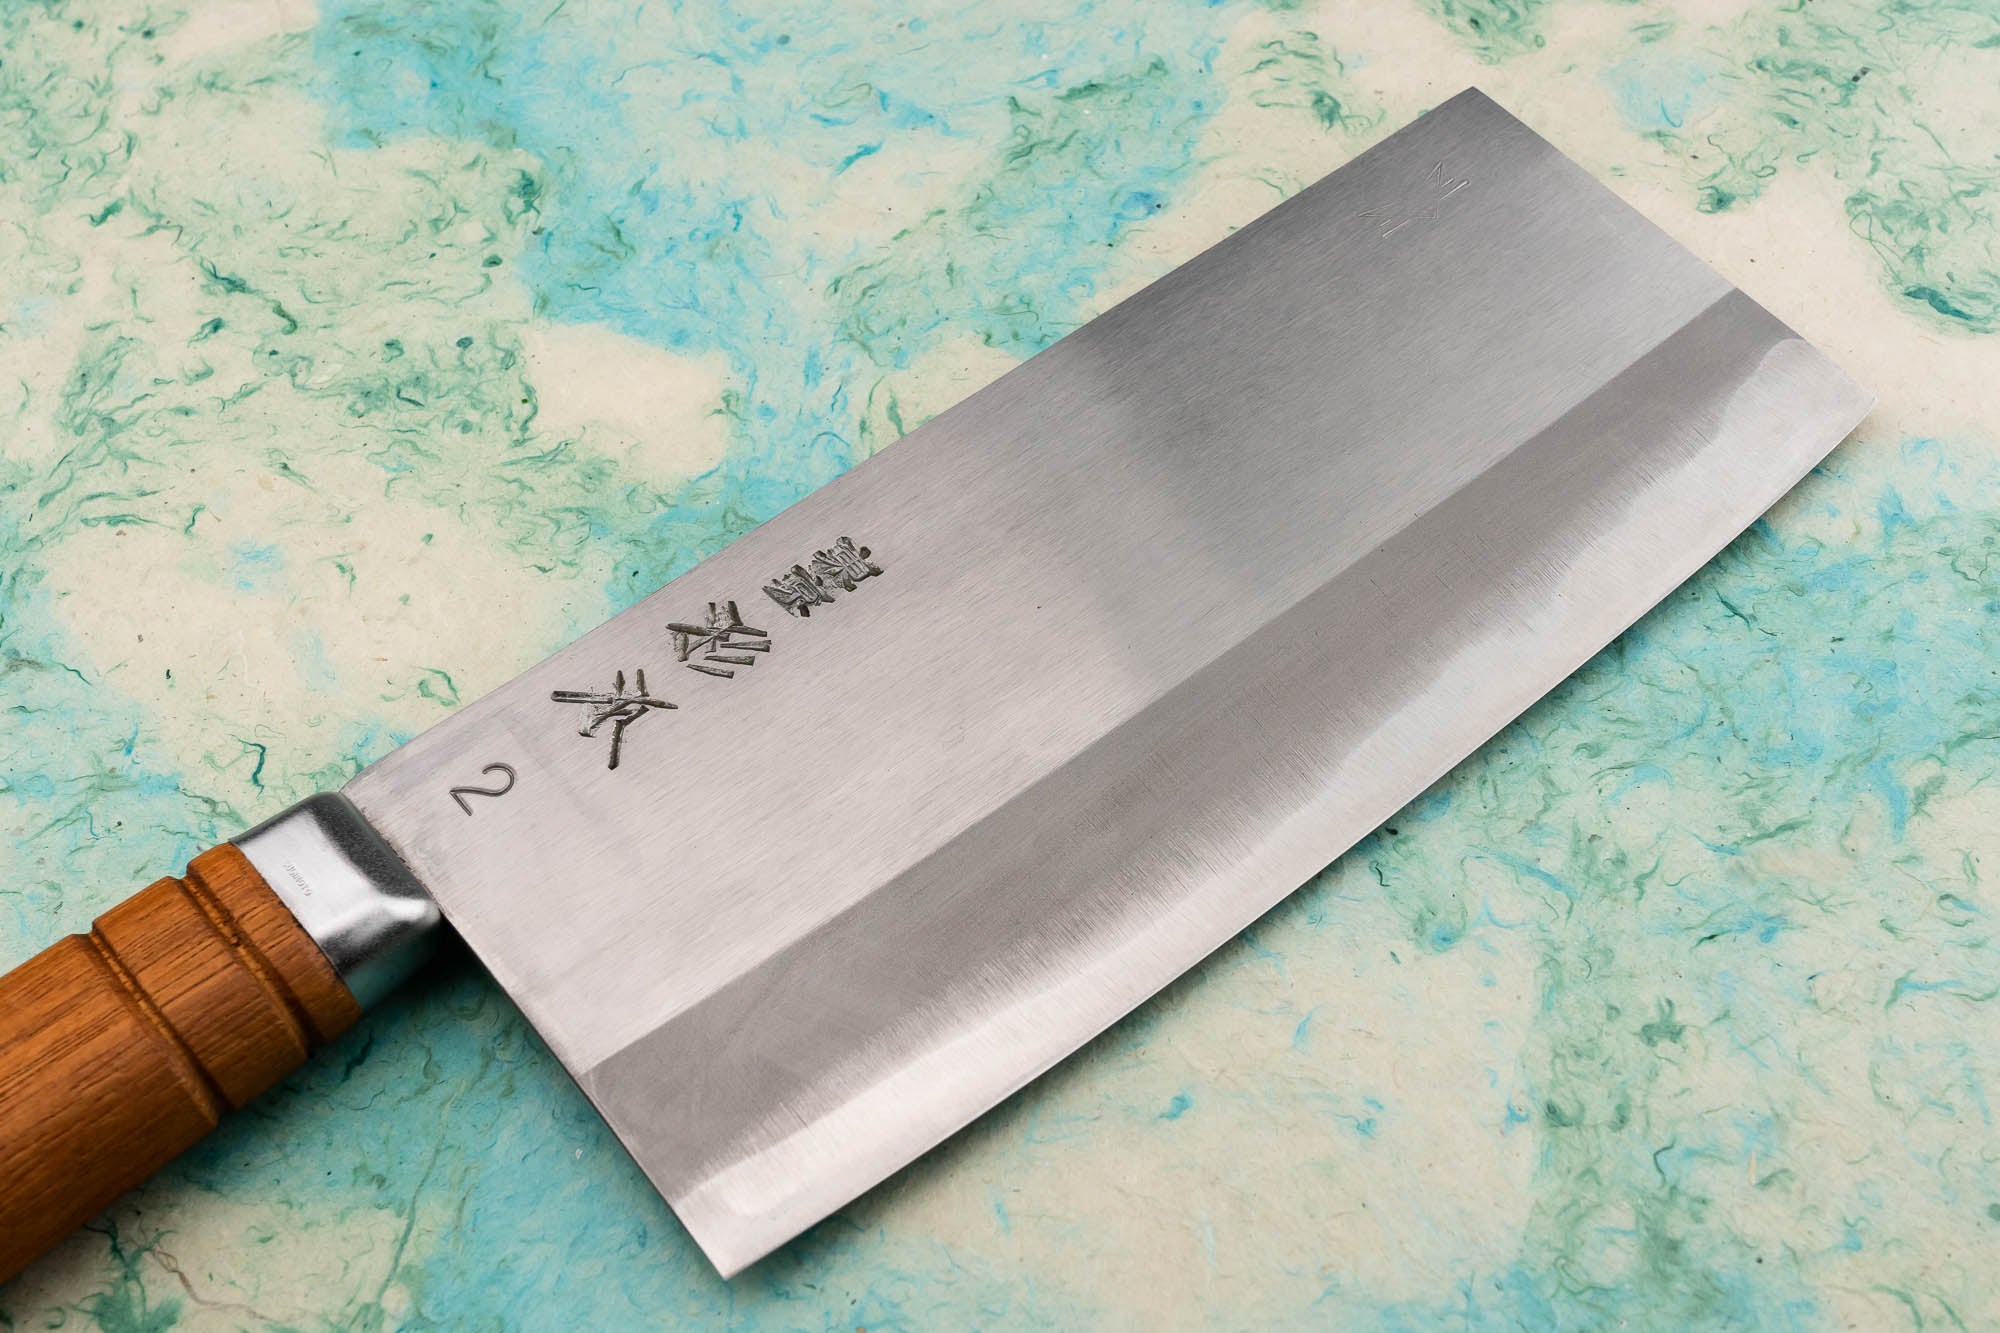 CCK Cleaver Civil and Military Kitchen Chopper Knife 215mm - KF1203